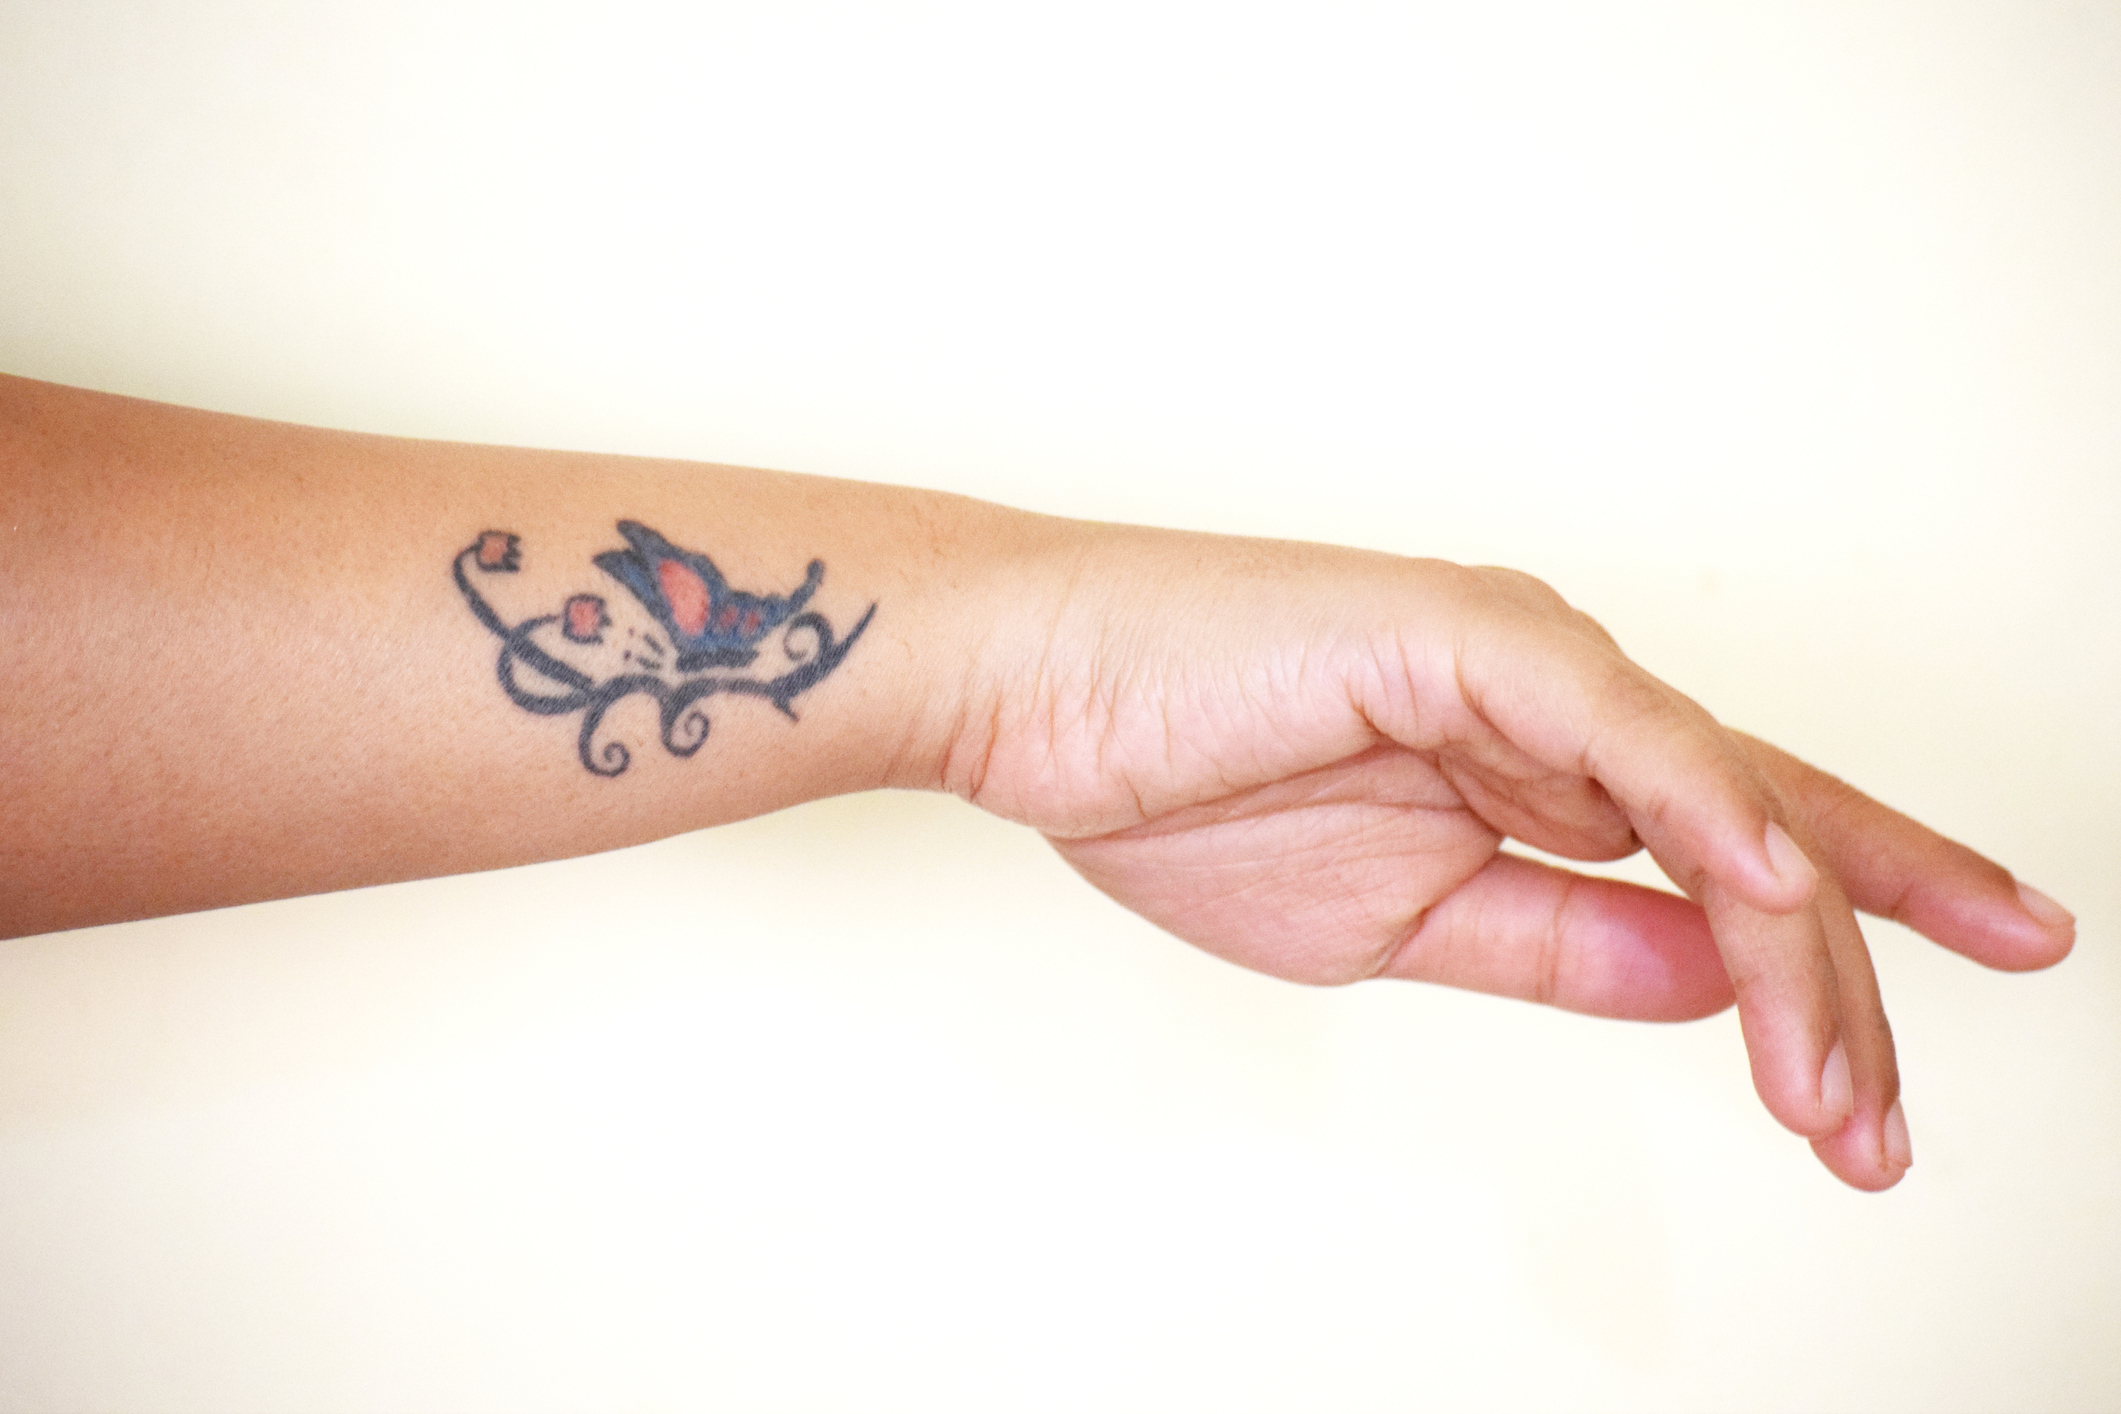 How Bad Is Tattoo Pain? Body Areas Ranked | LoveToKnow Health & Wellness